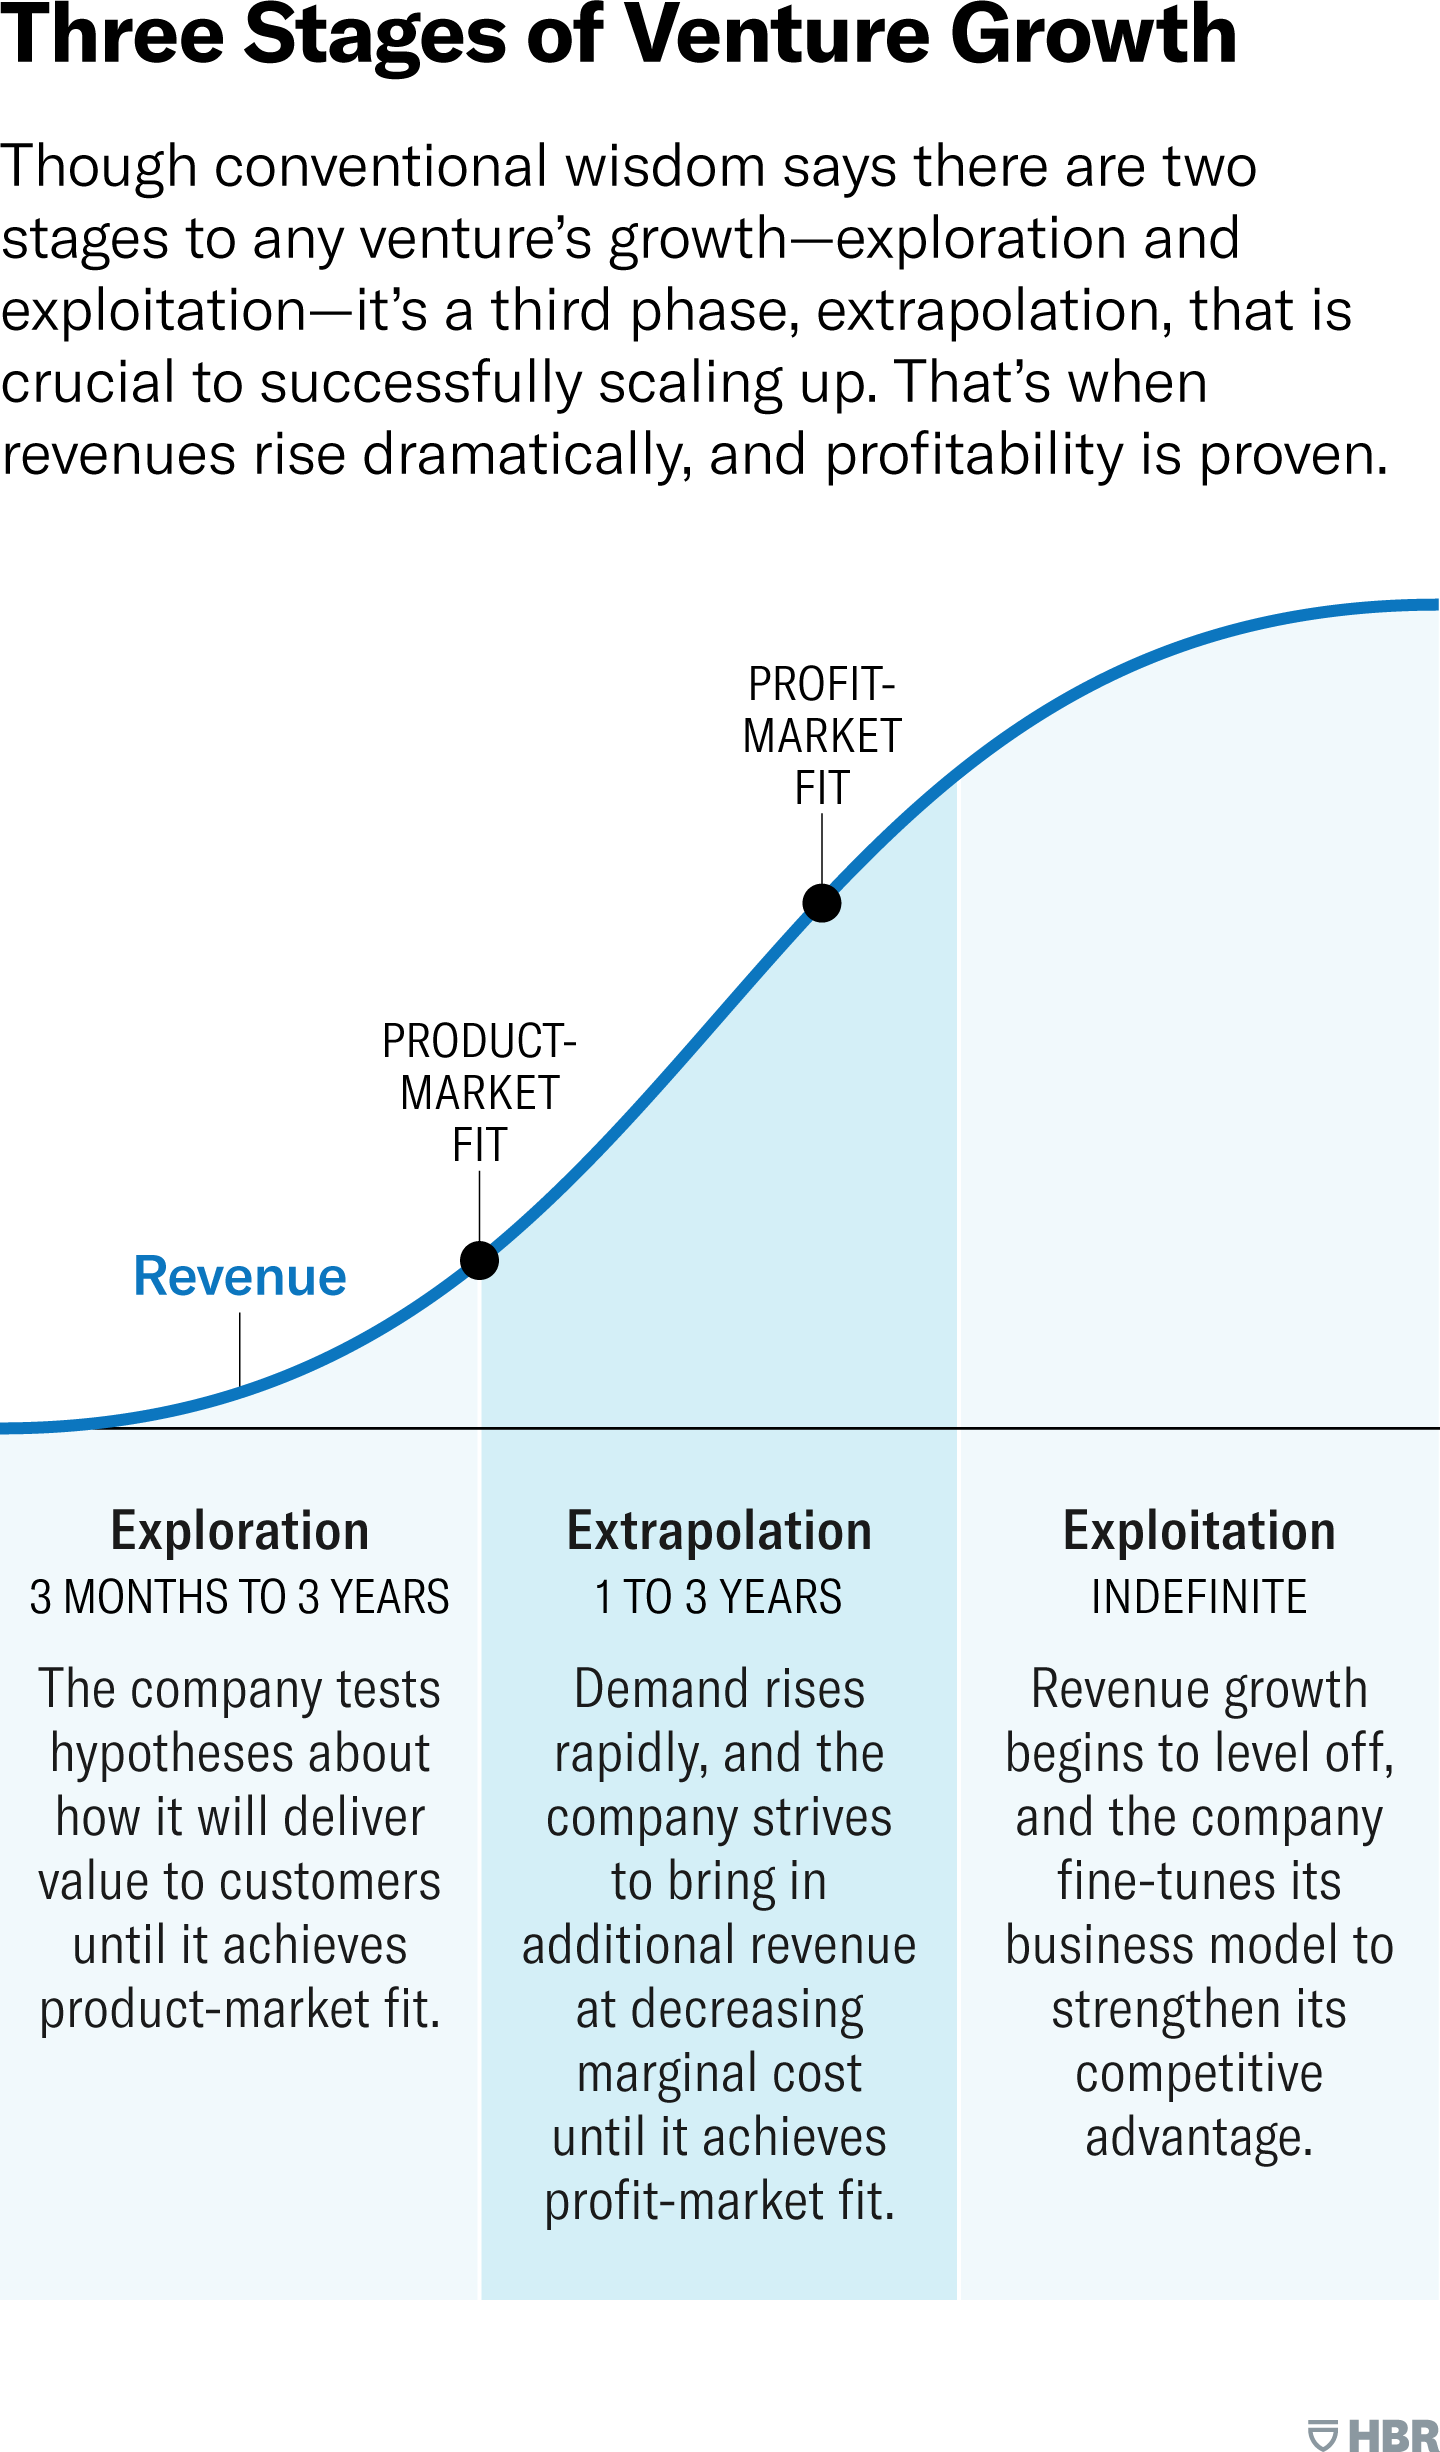 Three Stages of Venture Growth. Though conventional wisdom says there are two stages to any venture’s growth—exploration and exploitation—it’s a third, interim phase, extrapolation, that is crucial to successfully scaling up. That’s when revenues rise dramatically and profitability is proven. Stage 1, exploration, lasts three months to three years. In this phase the company tests hypotheses about how it will deliver value to customers until it achieves product-market fit.  Stage 2, extrapolation, lasts one to three years. In this phase demand rises rapidly, and the company strives to bring in additional revenue at decreasing marginal cost until it achieves profit-market fit. Stage 3, exploitation, lasts indefinitely. In this phase revenue growth begins to level off, and the company fine-tunes its business model to strengthen its competitive advantage.